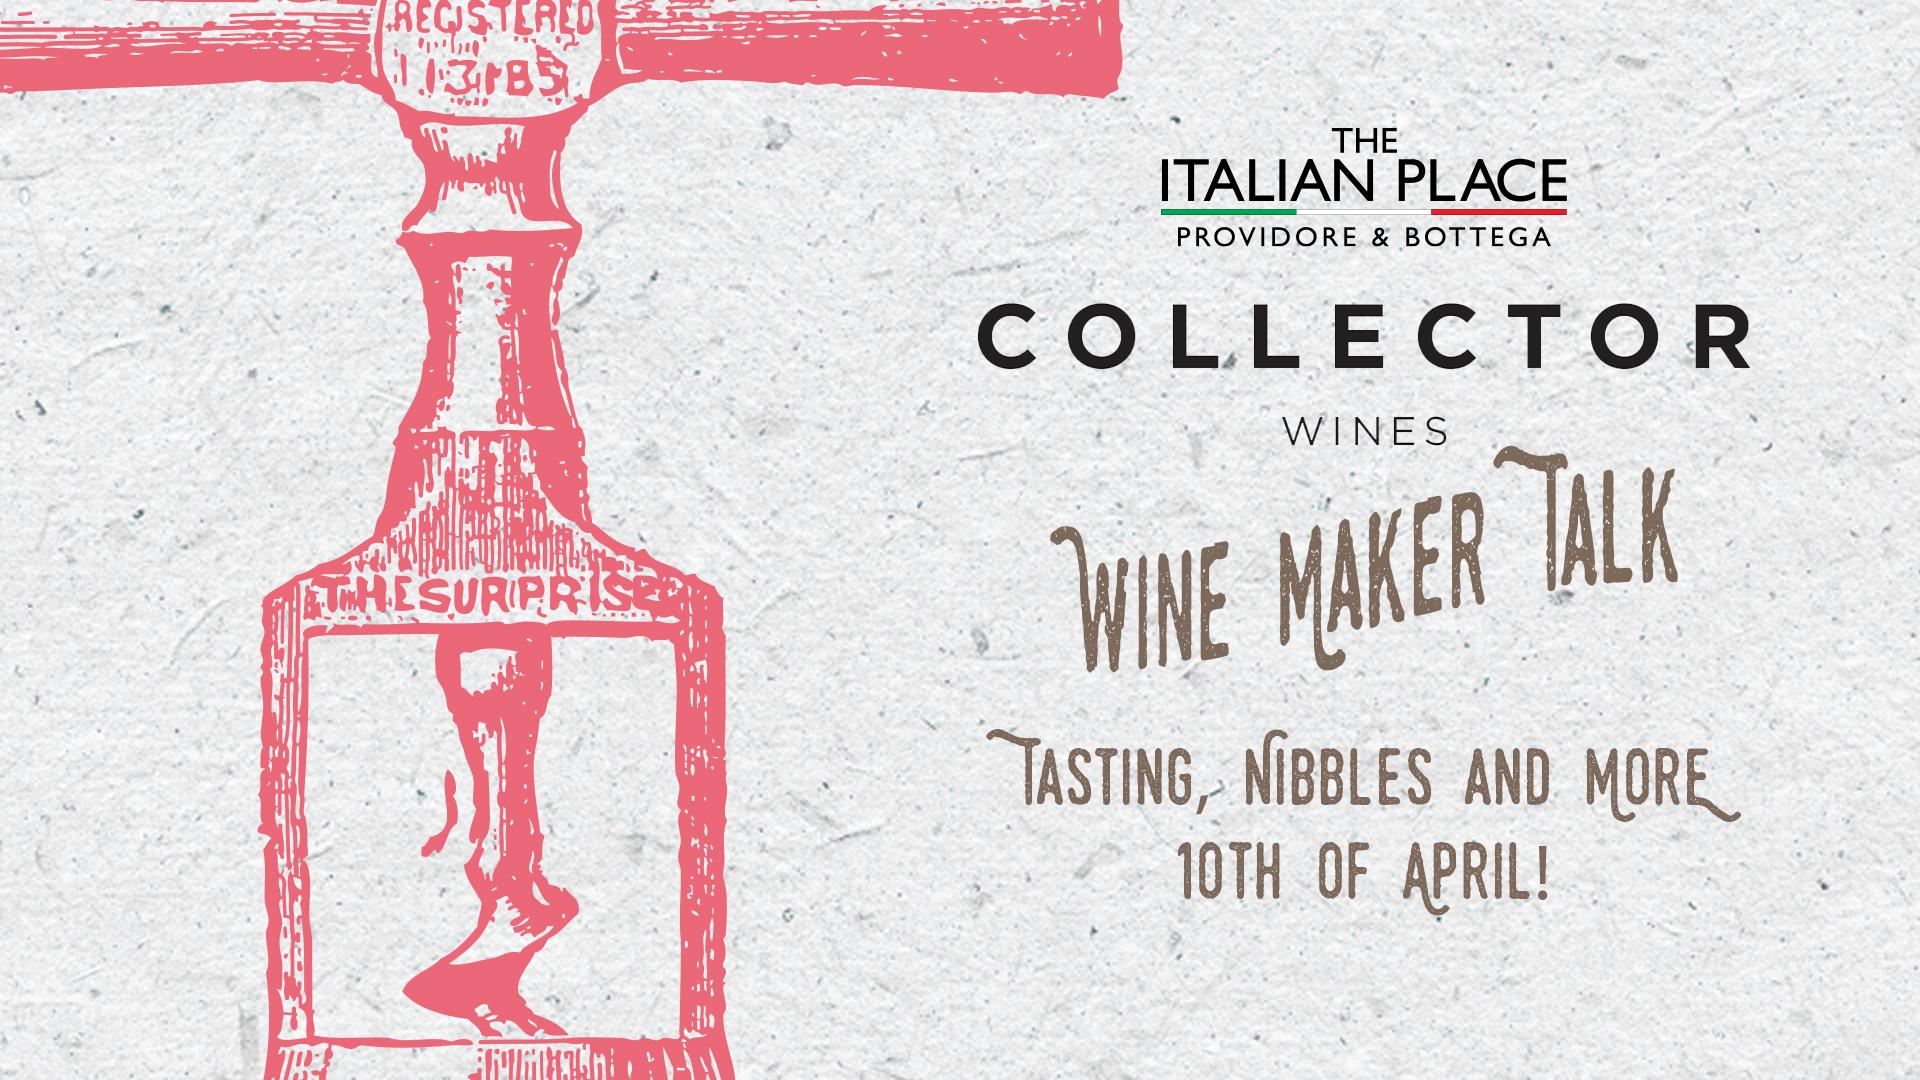 Winemaker Talk with Collector Wines & Tasting & Nibbles from the Providore